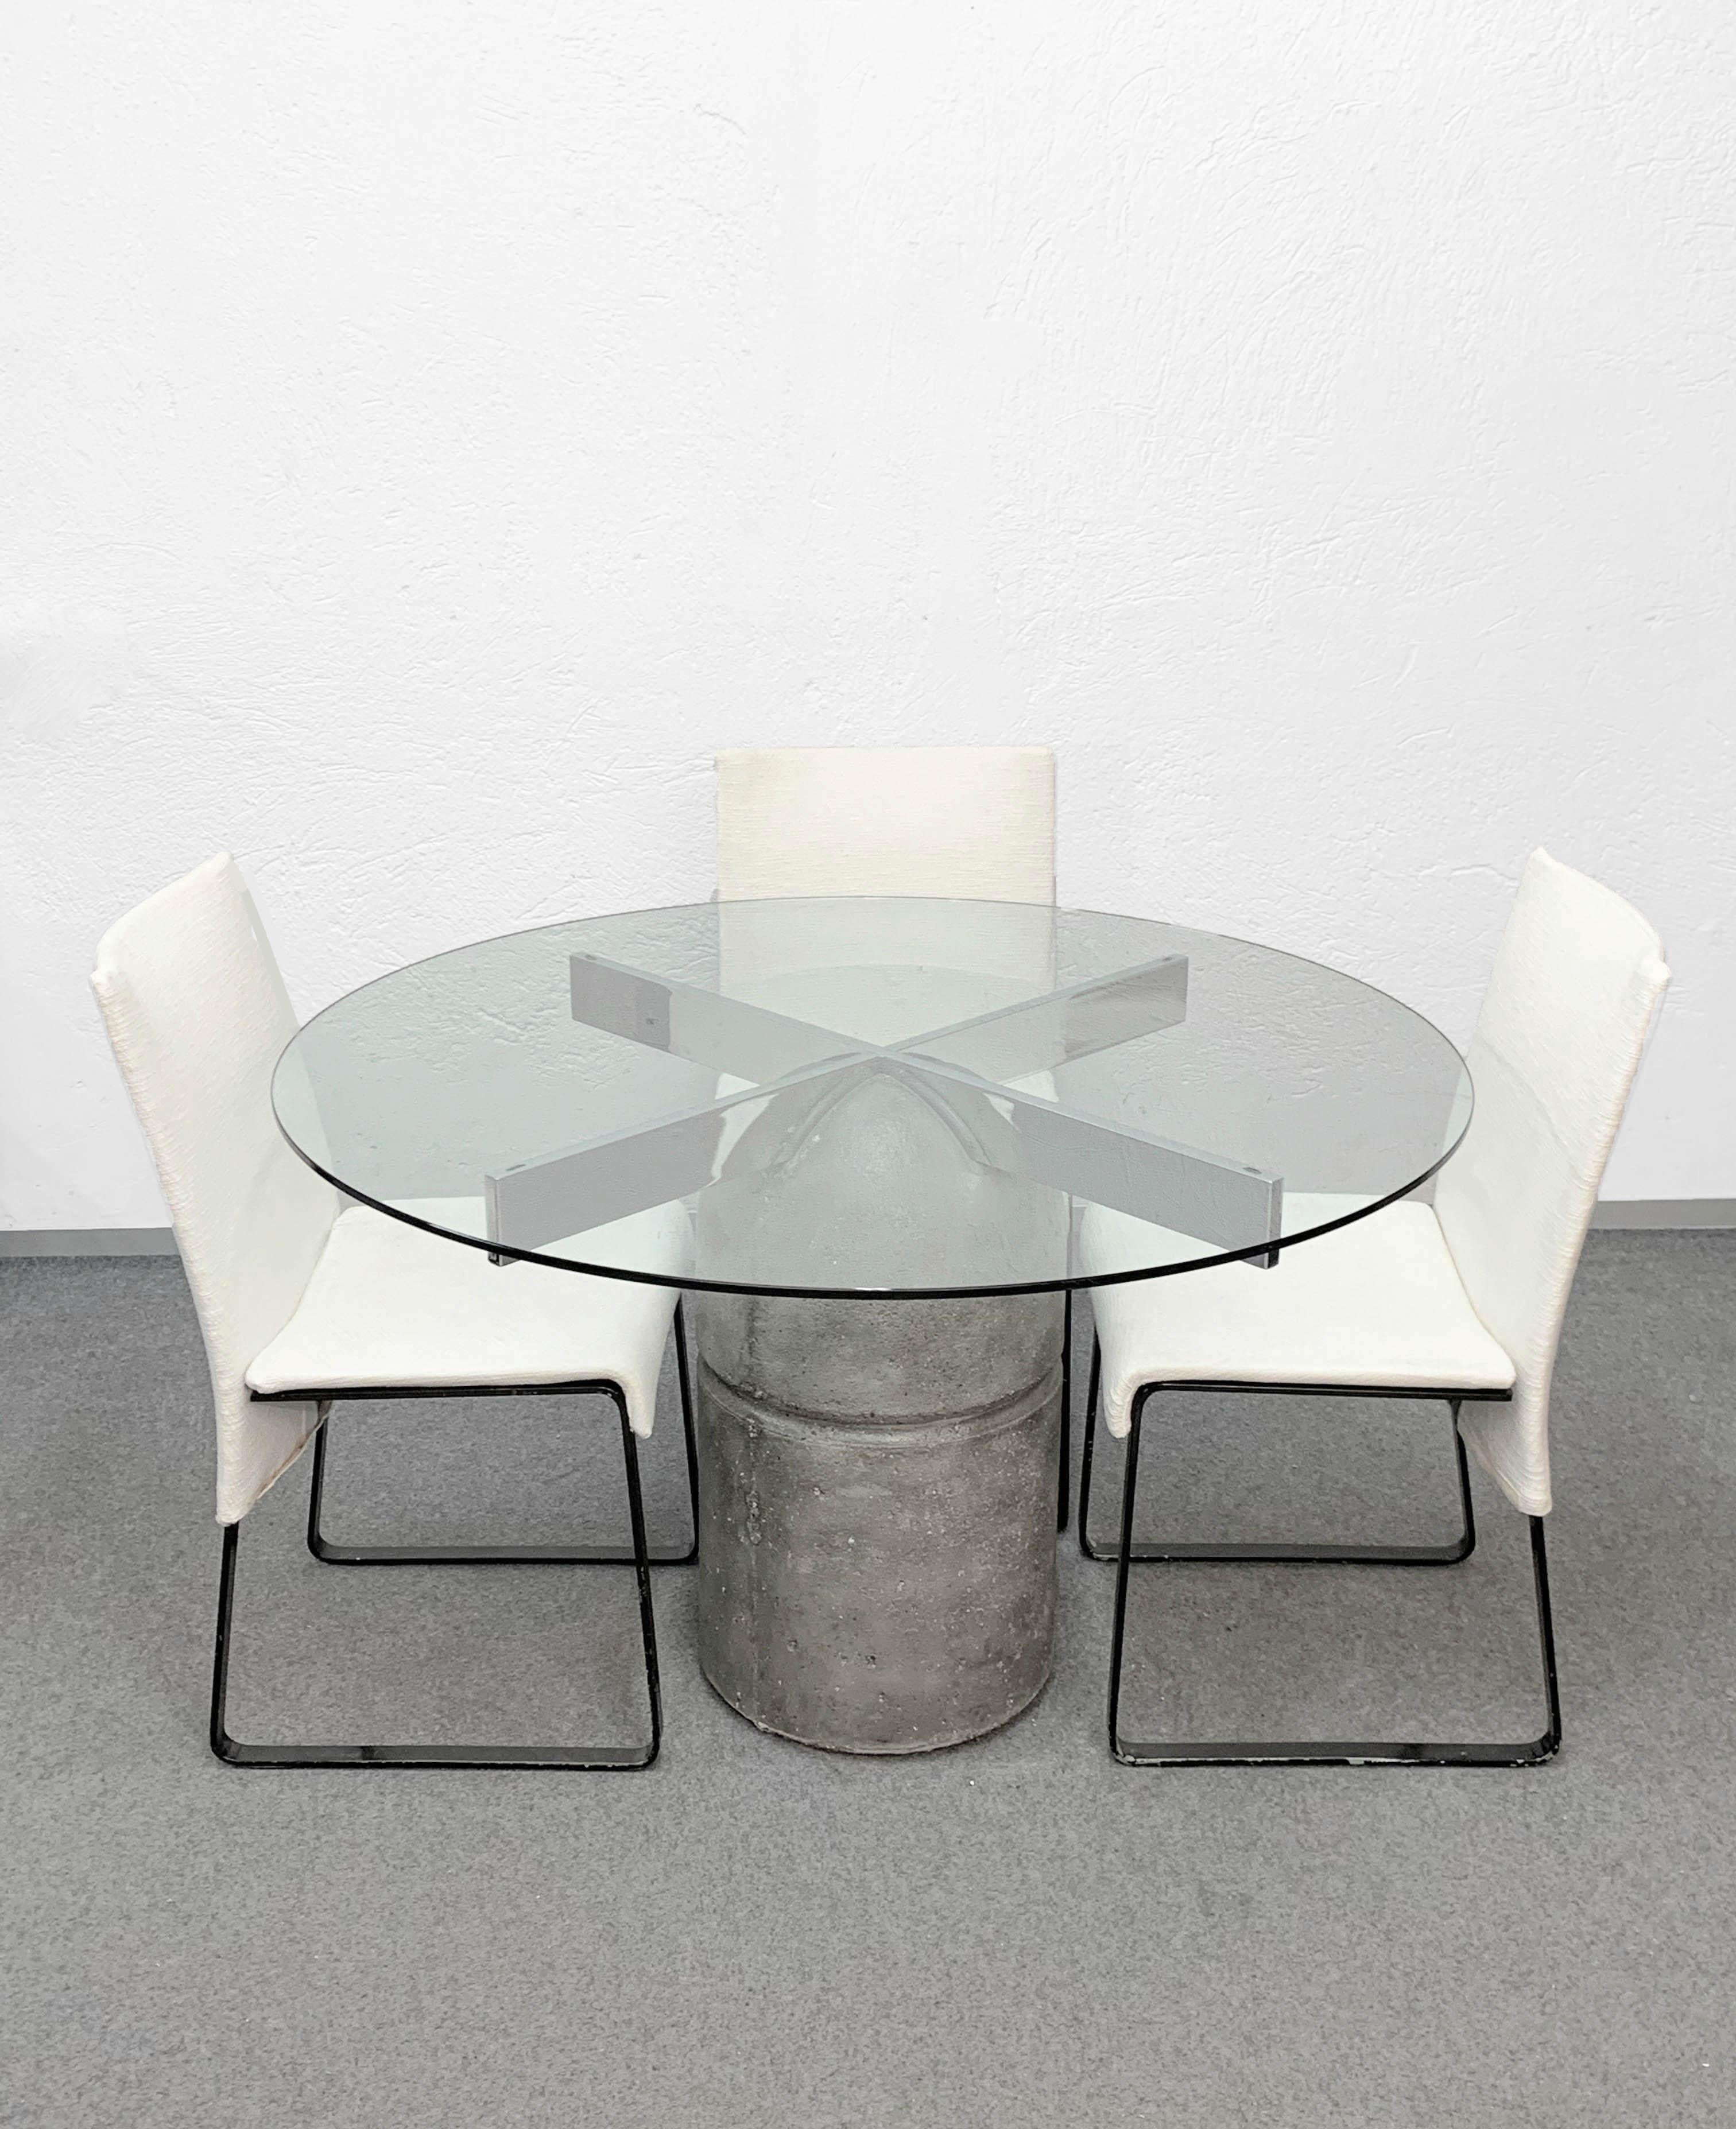 Italian Midcentury Giovanni Offredi Paracarro Dining Table and Chairs for Saporiti, 1973 For Sale